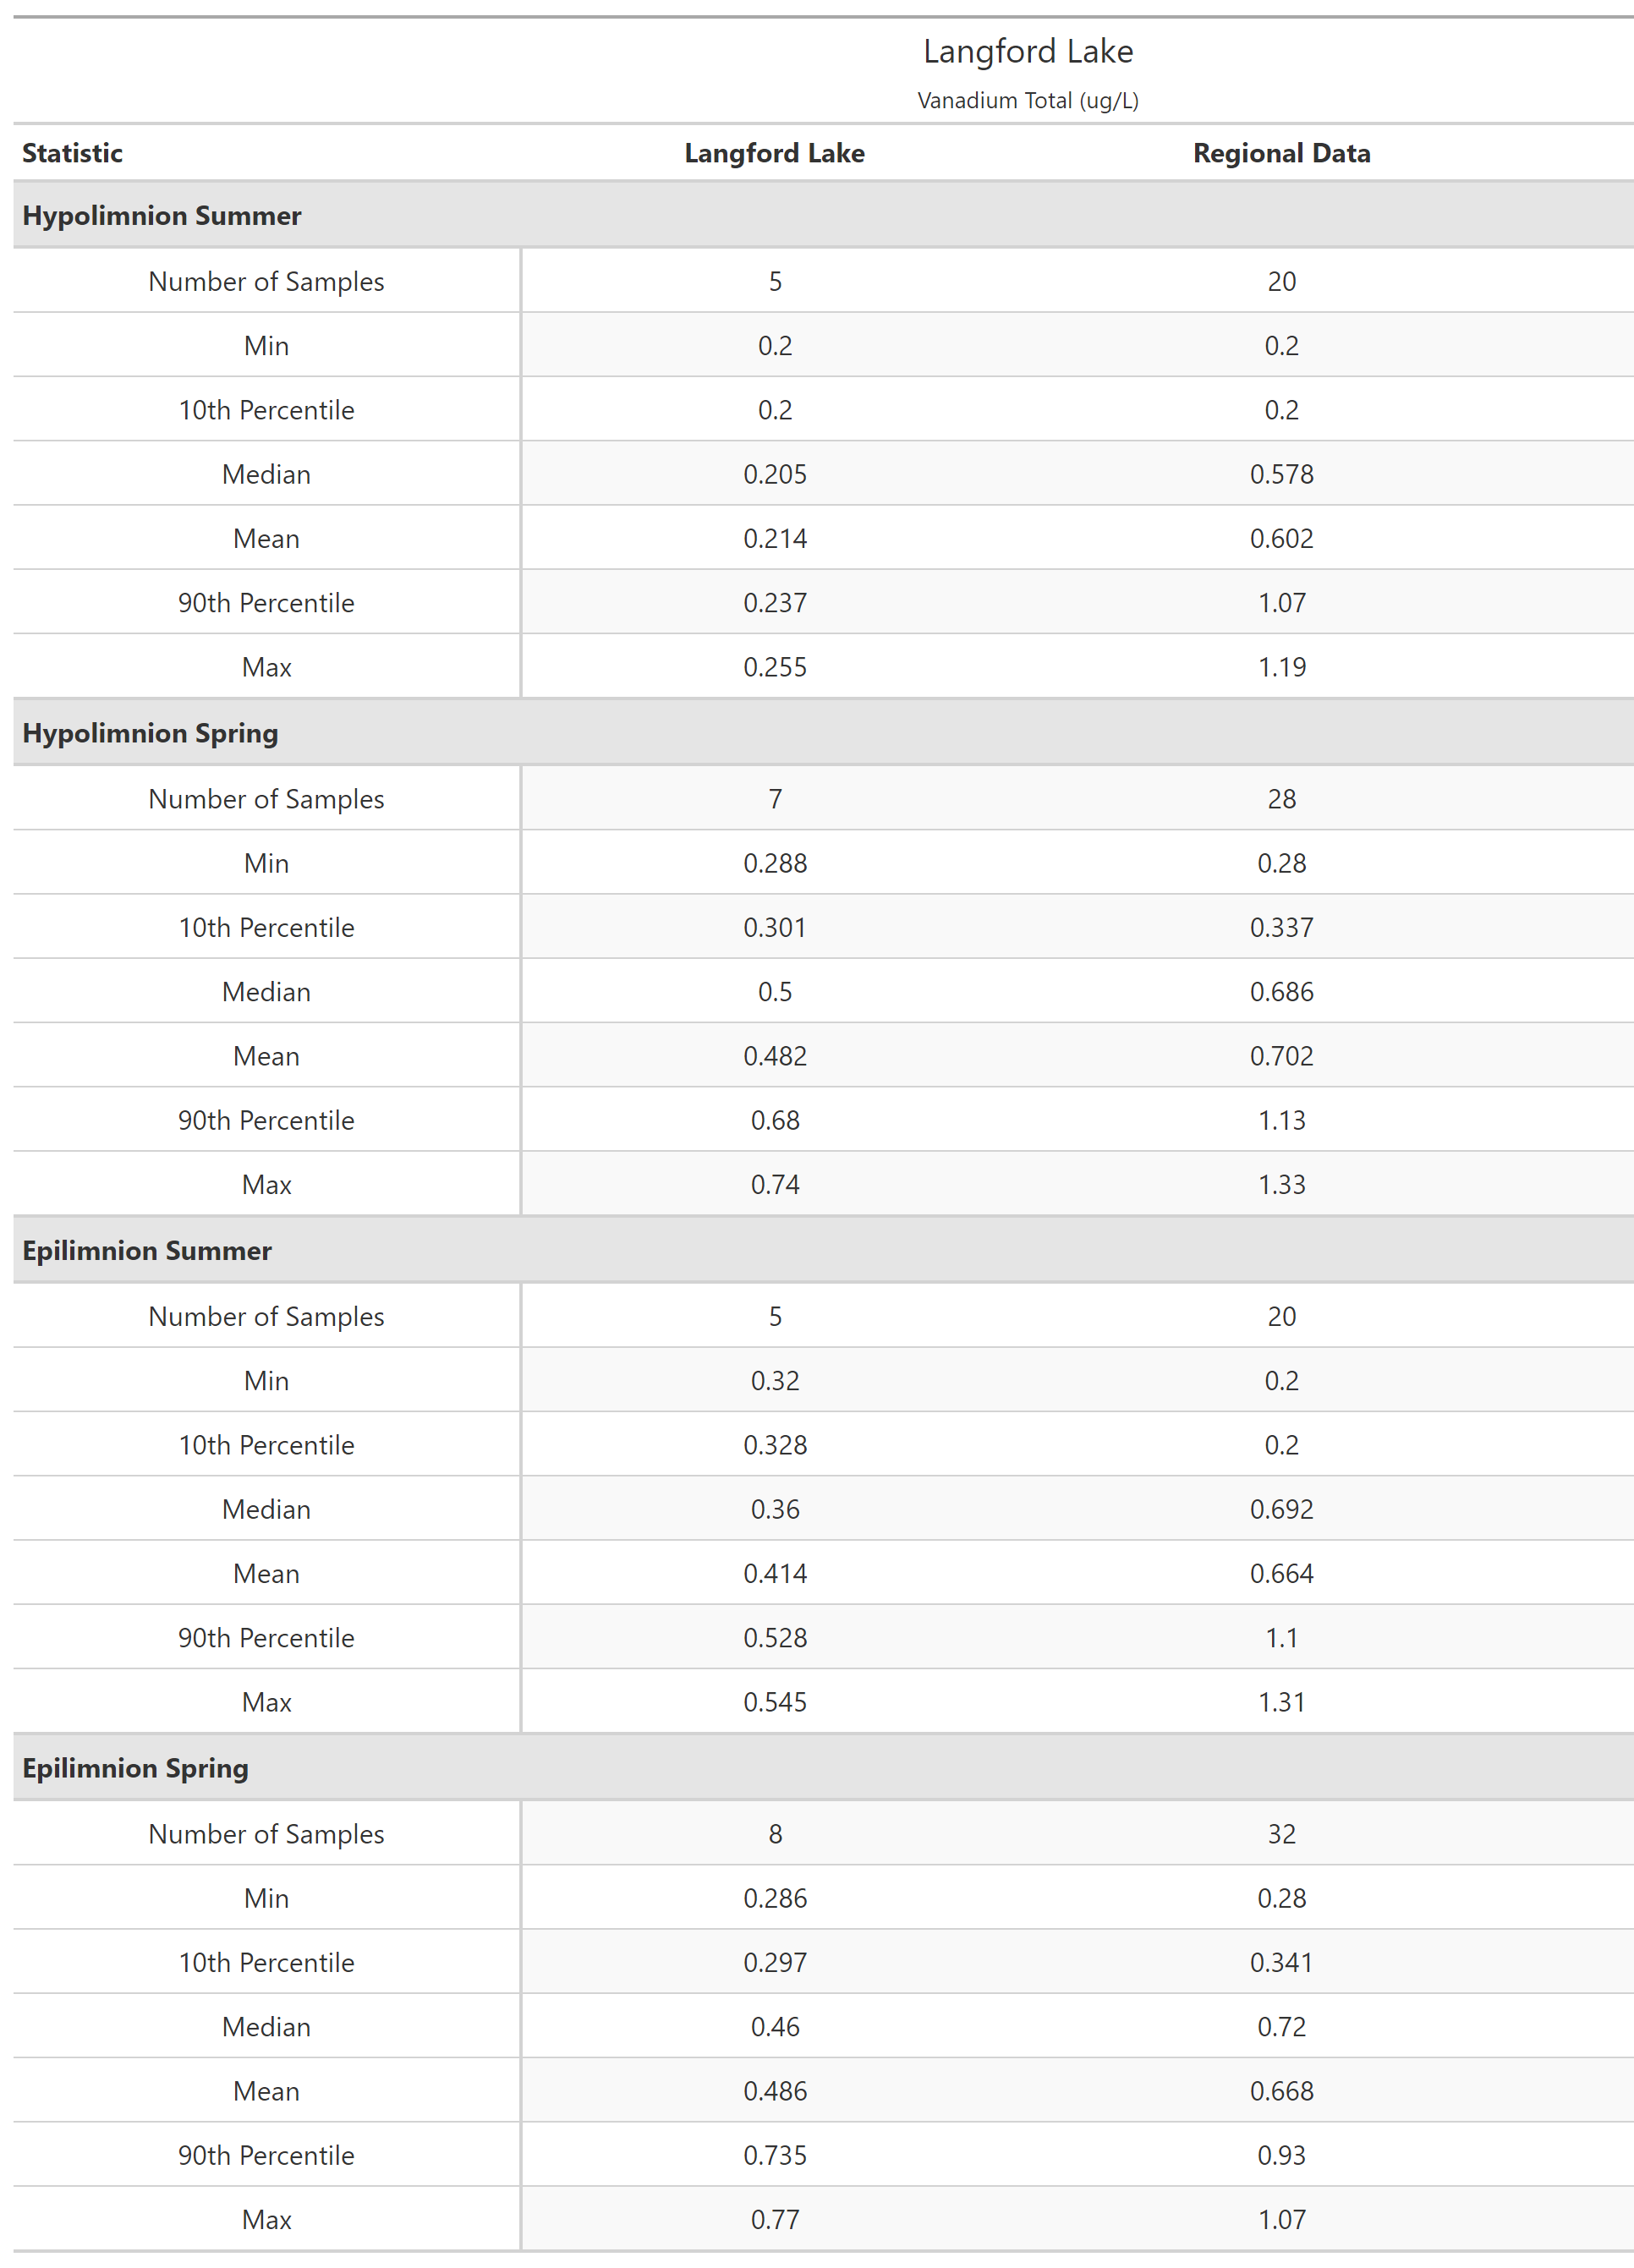 A table of summary statistics for Vanadium Total with comparison to regional data